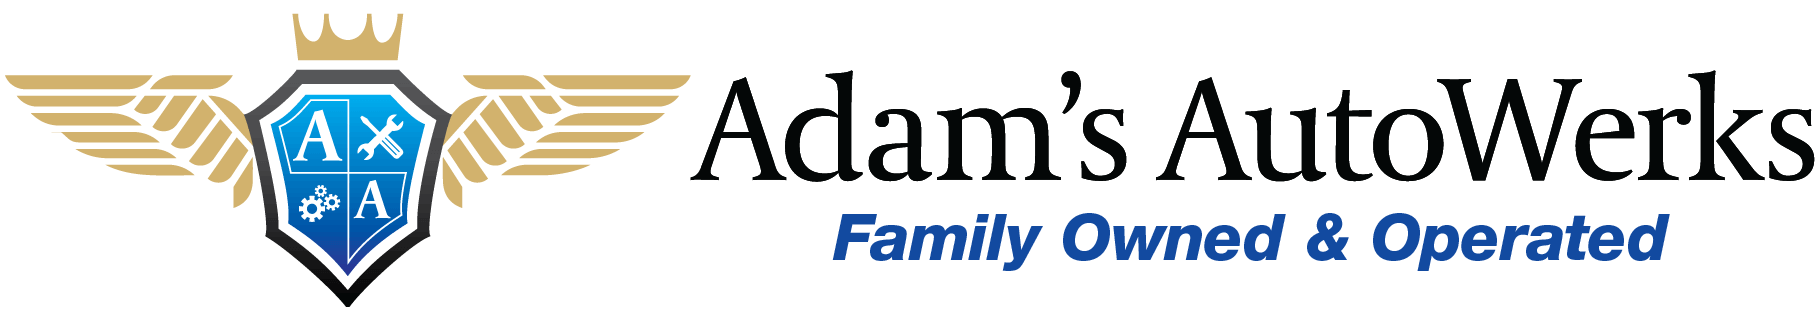 Adams AutoWerks Family Owned and Operated